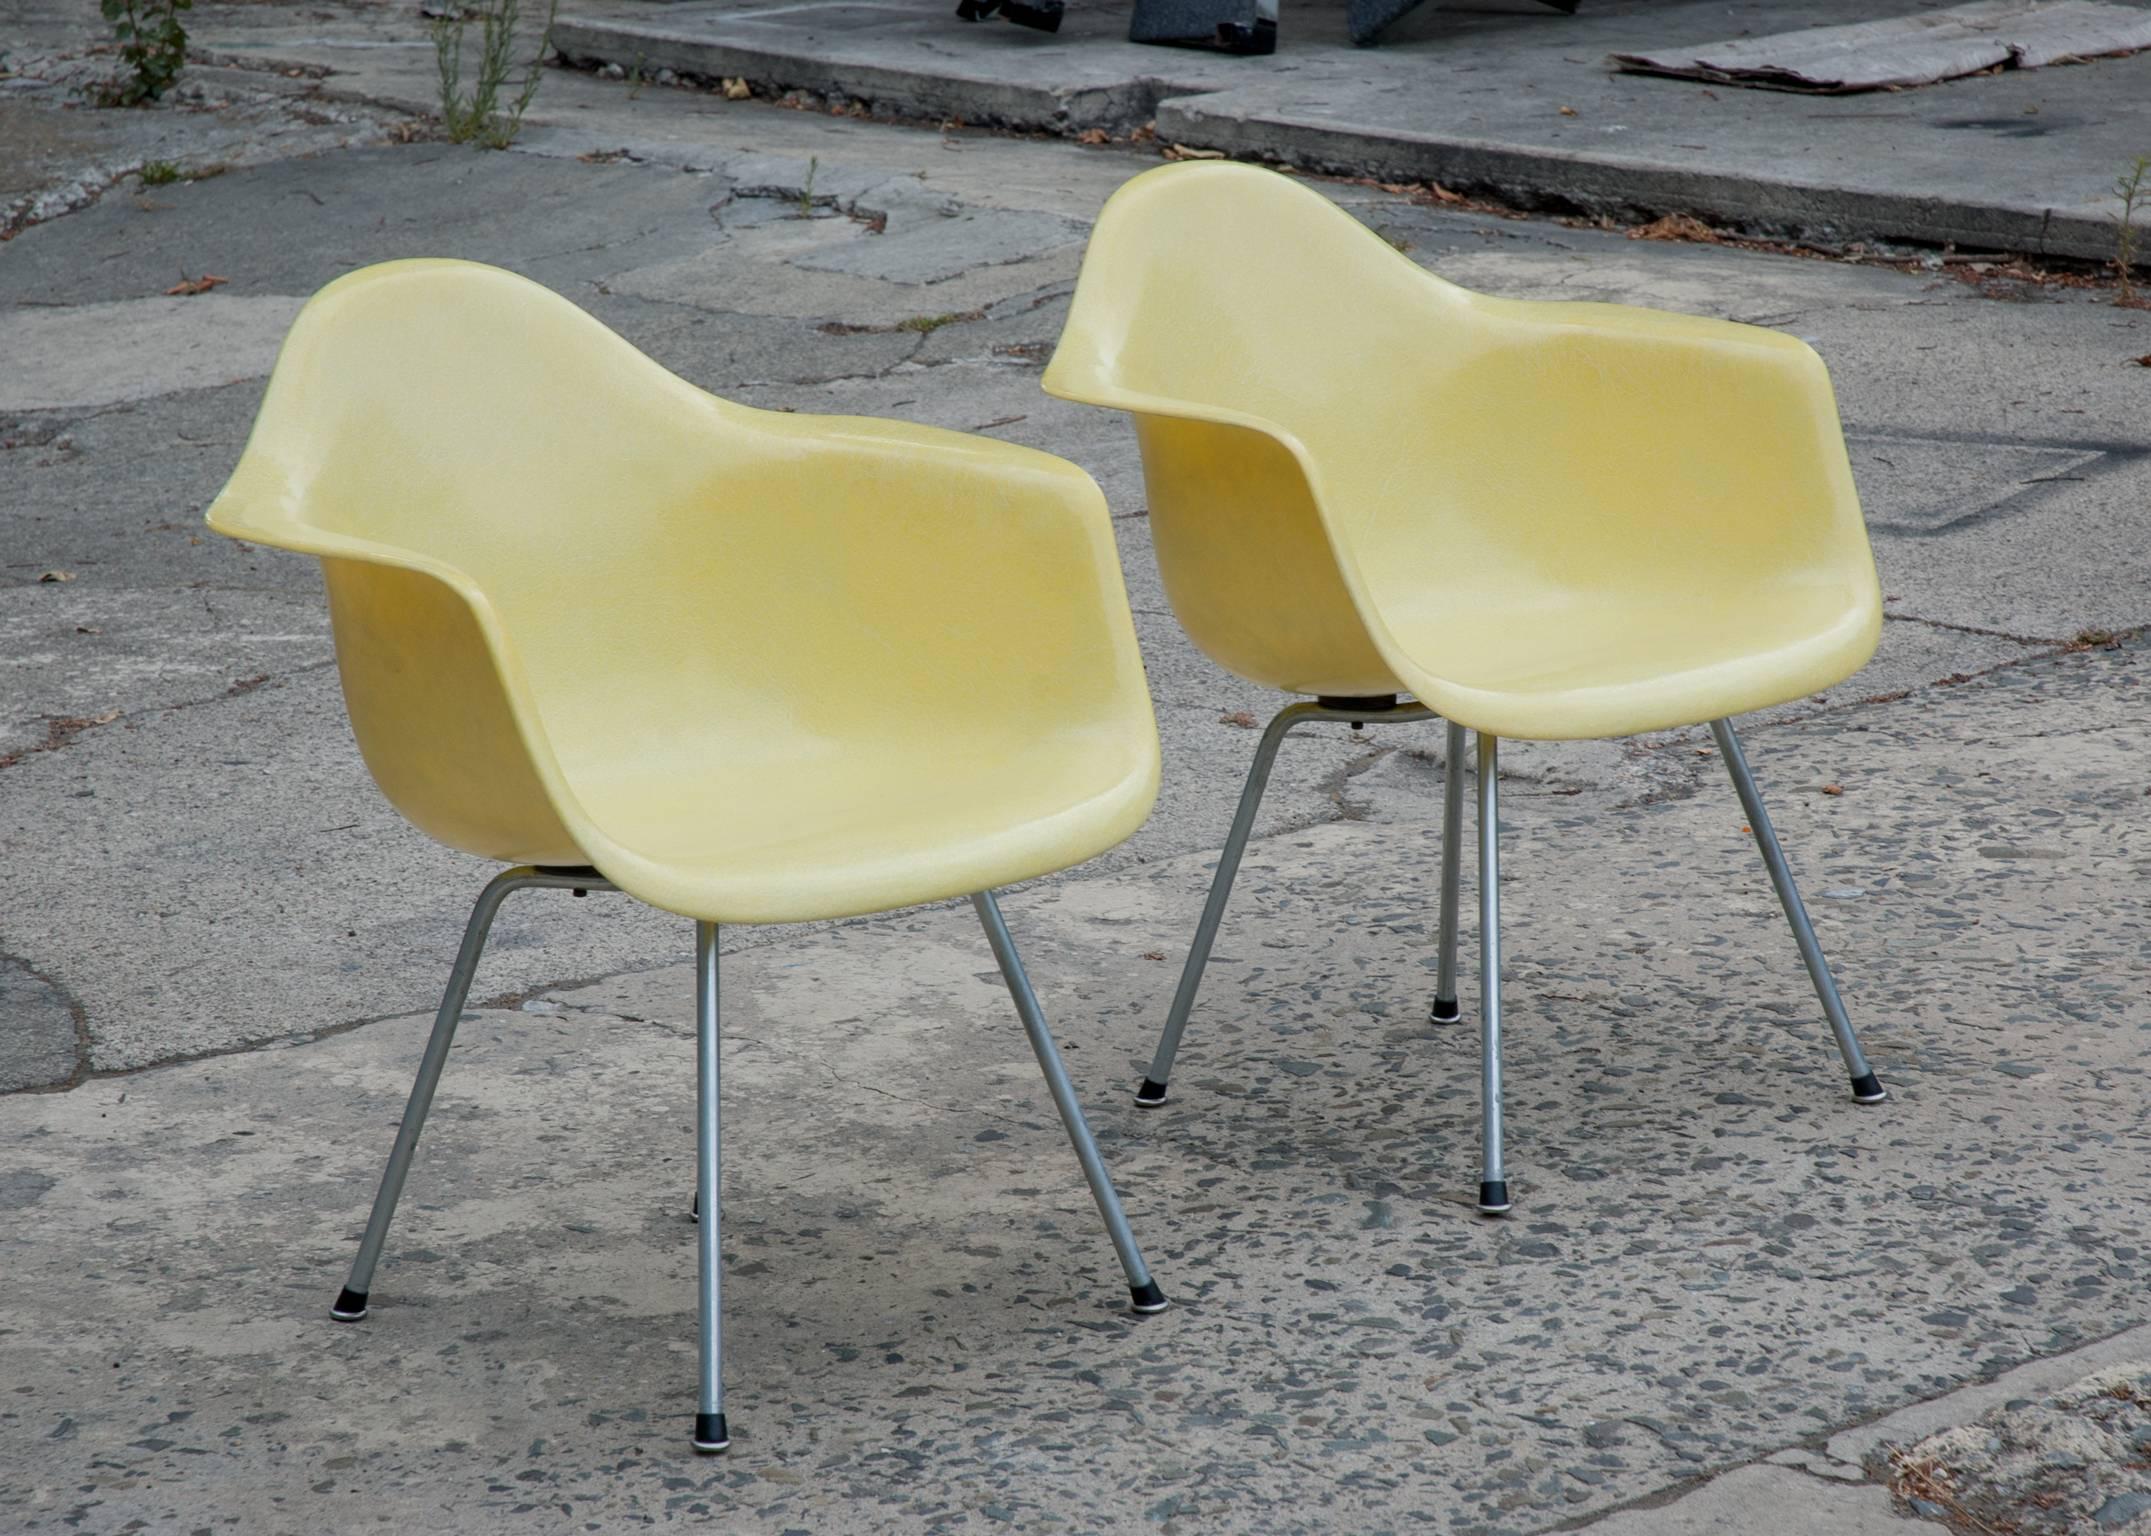 Early pair of pristine Charles Eames transitional fiberglass armchairs in translucent yellow with bright nickel-plated X-bases.
All original shock-mounts. No repairs. And no excuses as in 